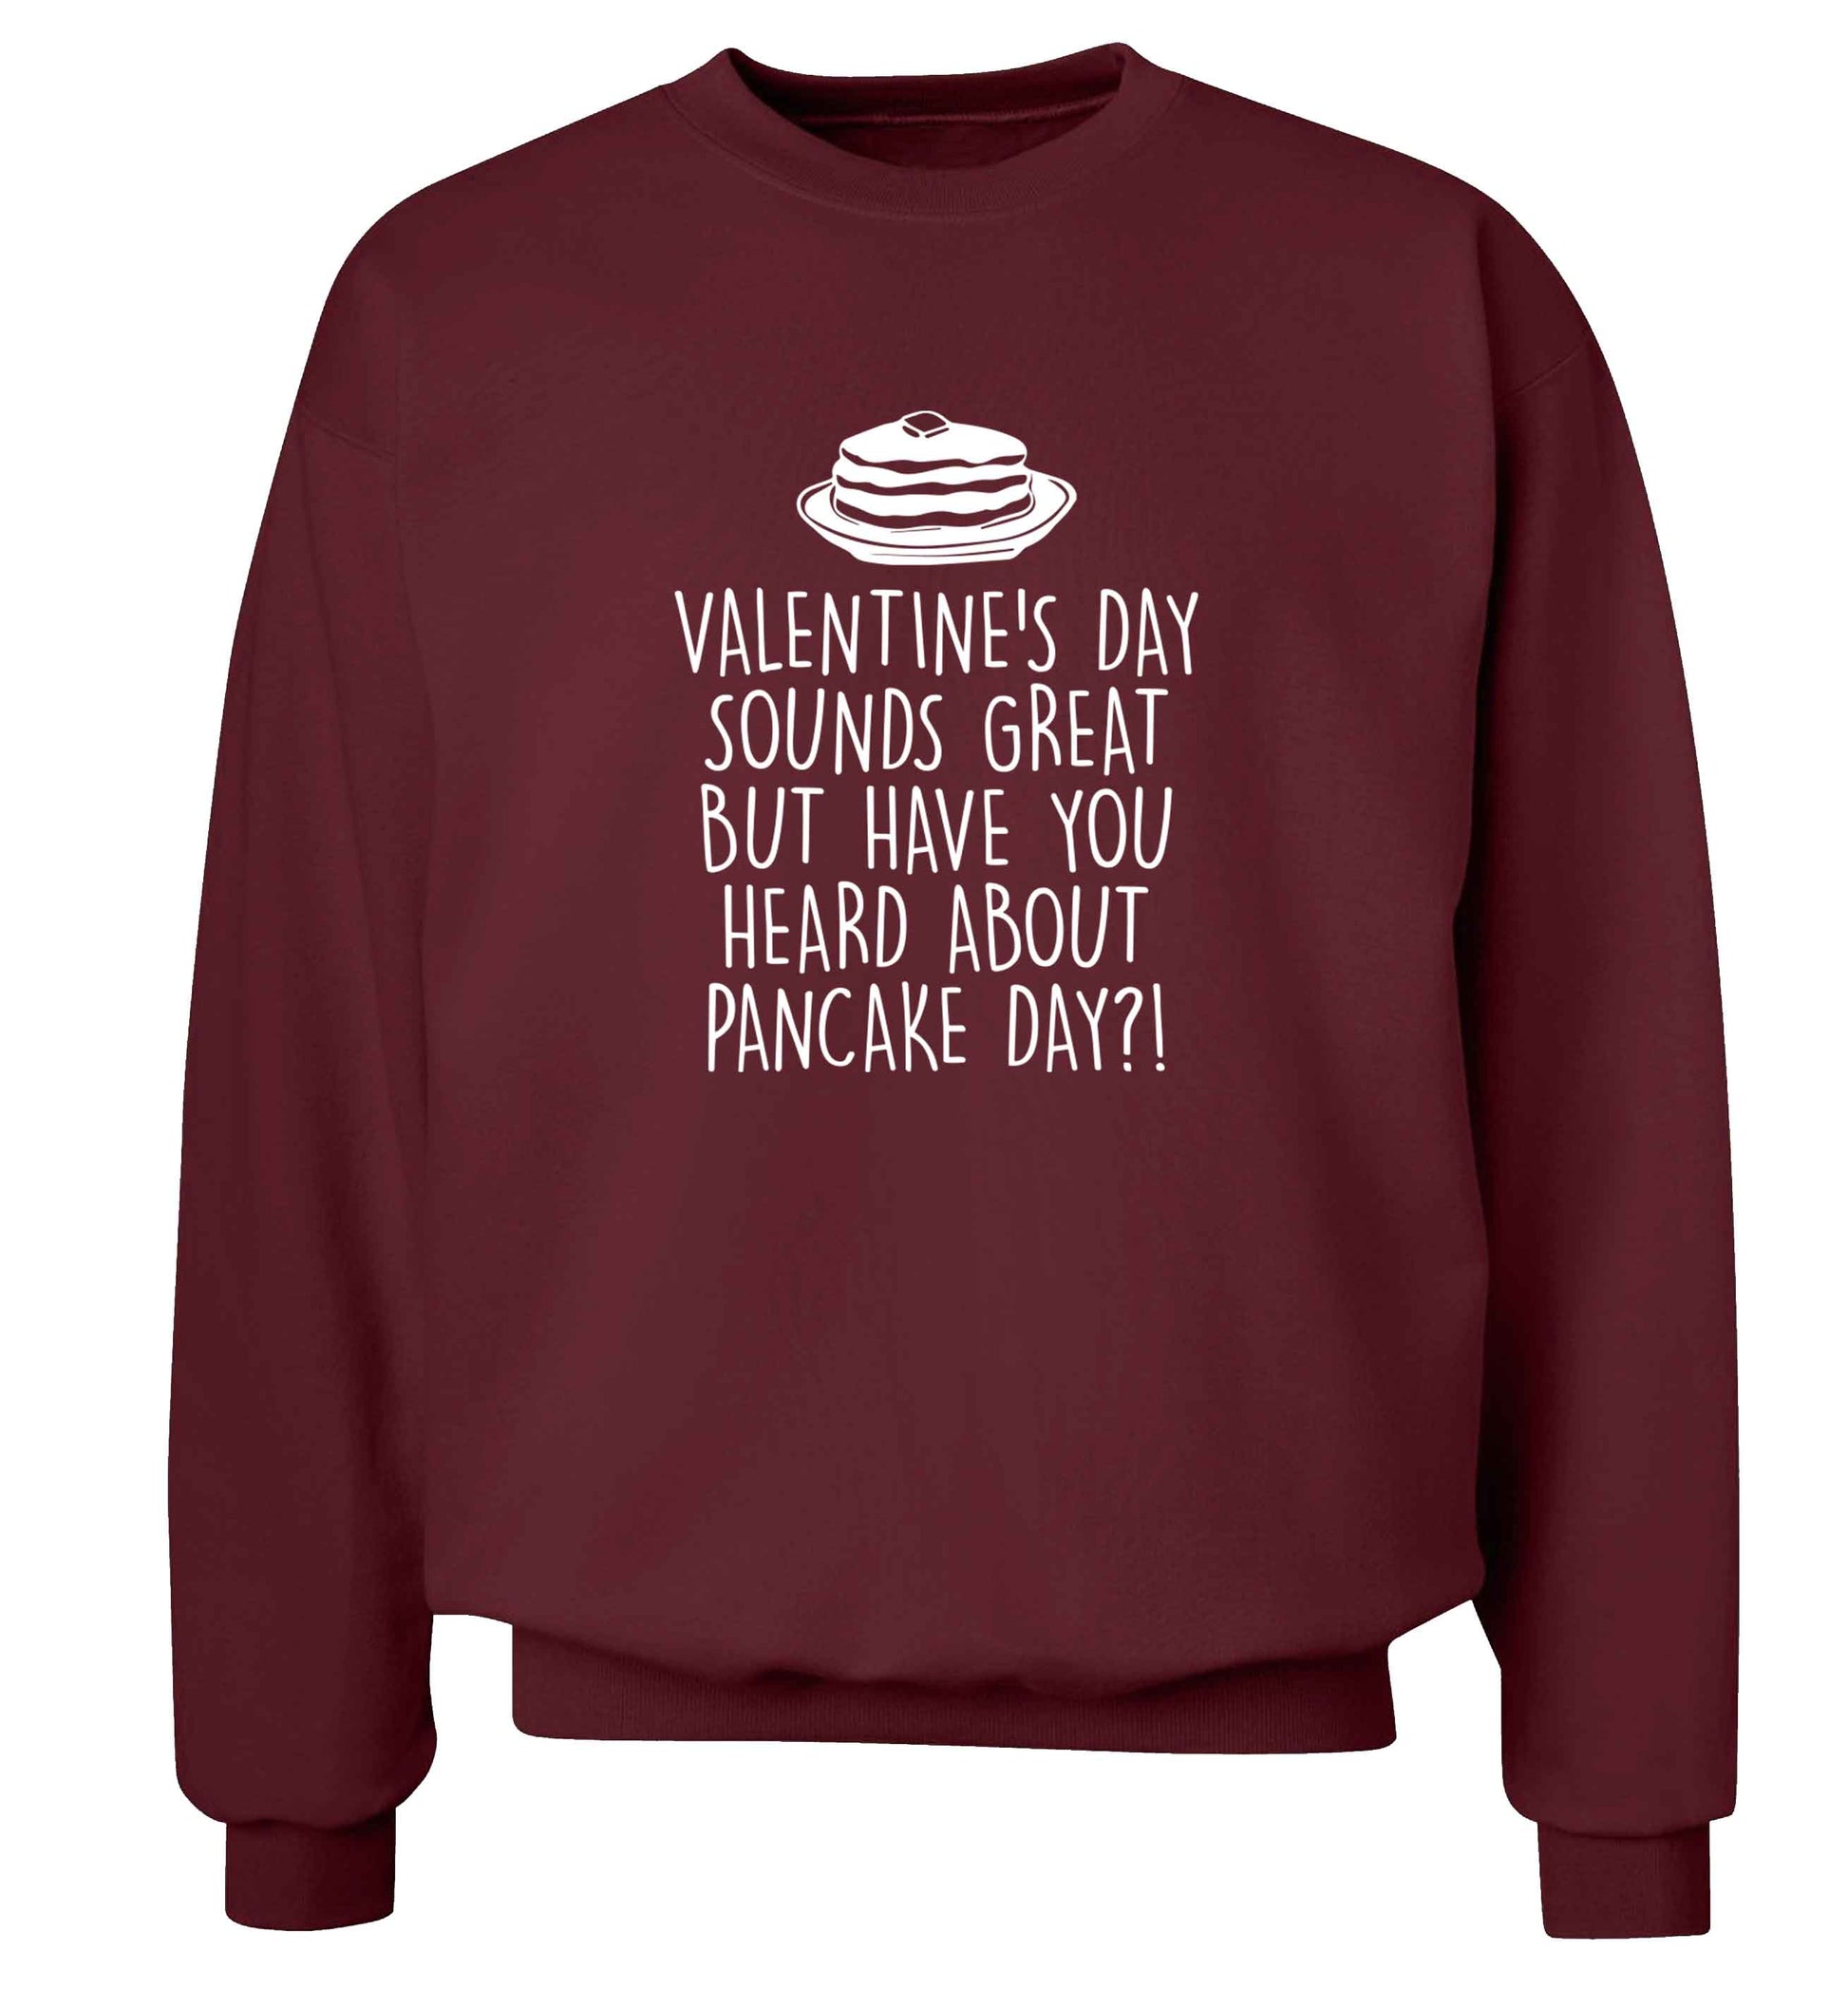 Valentine's day sounds great but have you heard about pancake day?! adult's unisex maroon sweater 2XL